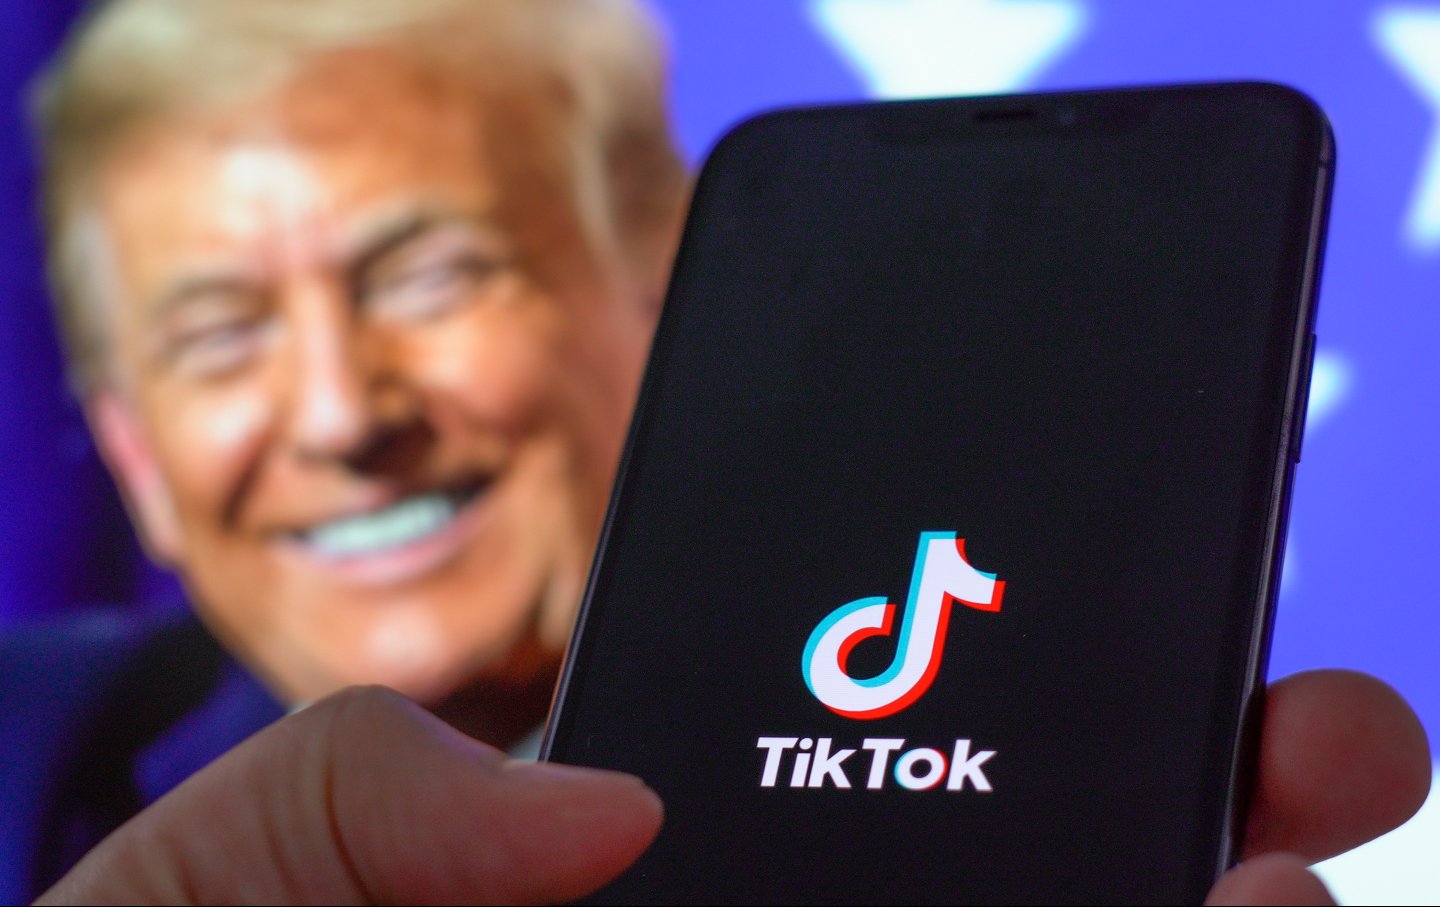 How the Theatrics of Banning TikTok Enables Repression at Home